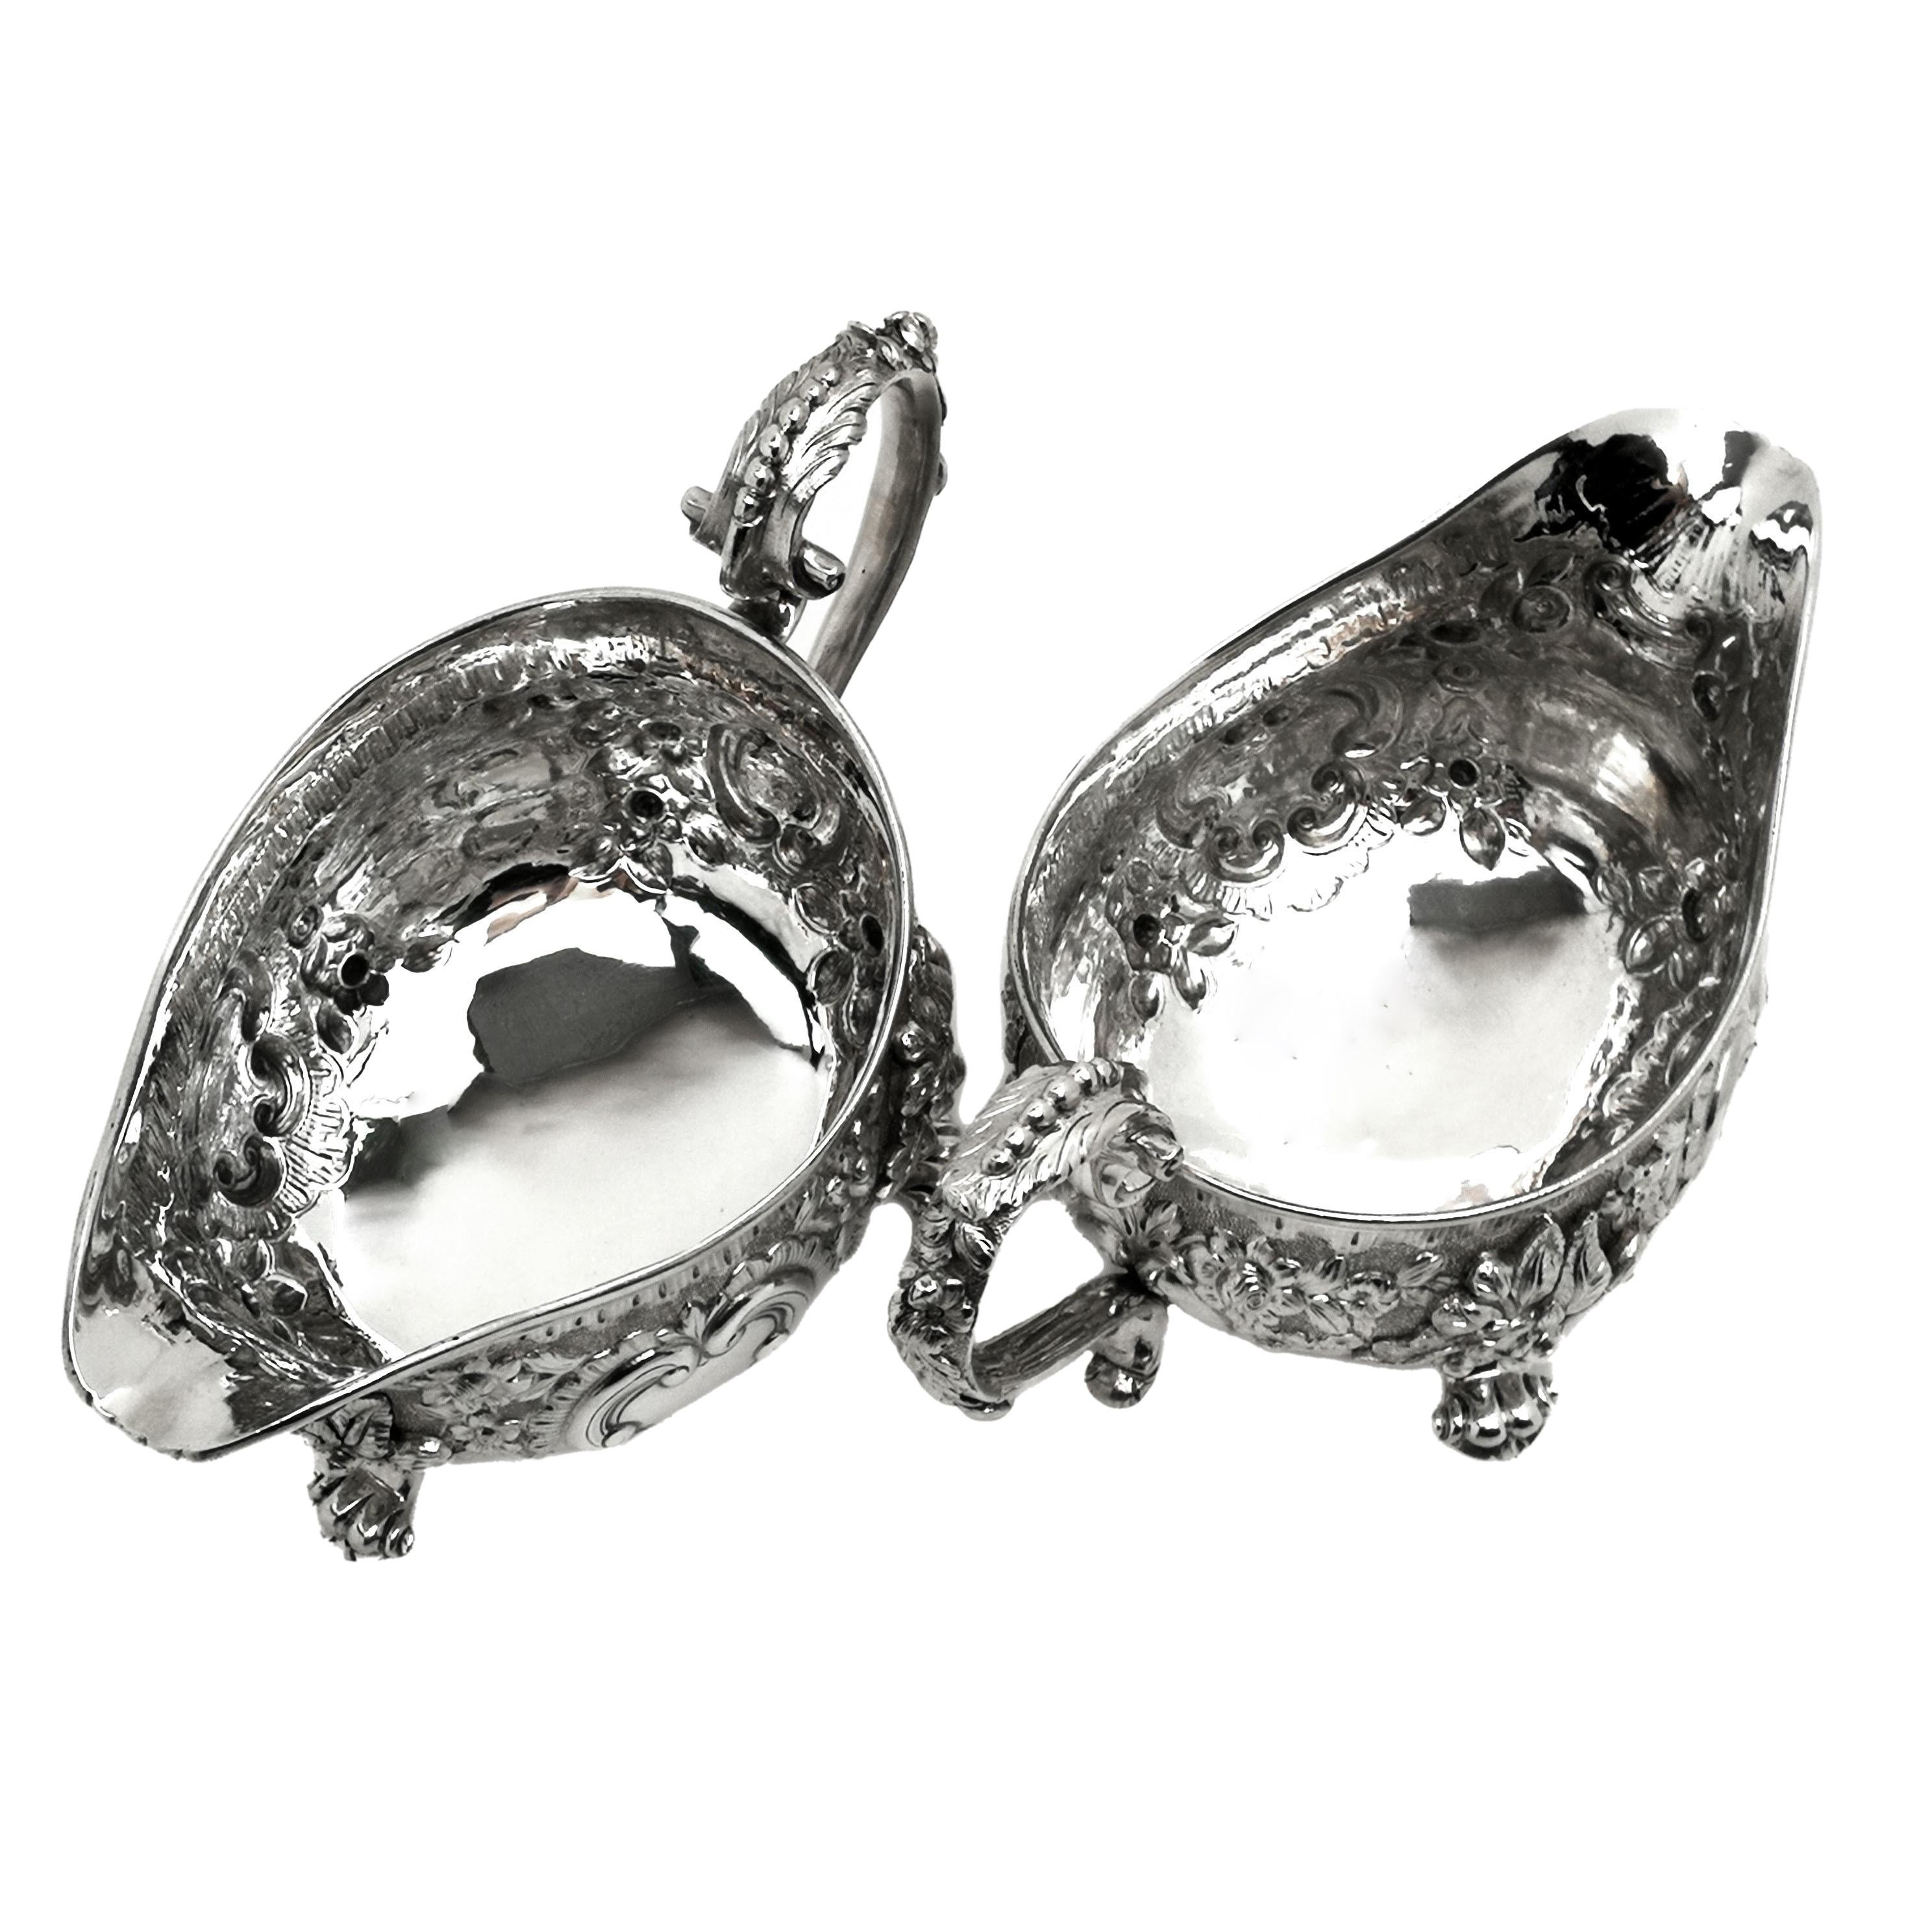 Pair of Georgian Sterling Silver Sauce Boats / Gravy Jugs George IV, 1820 For Sale 4